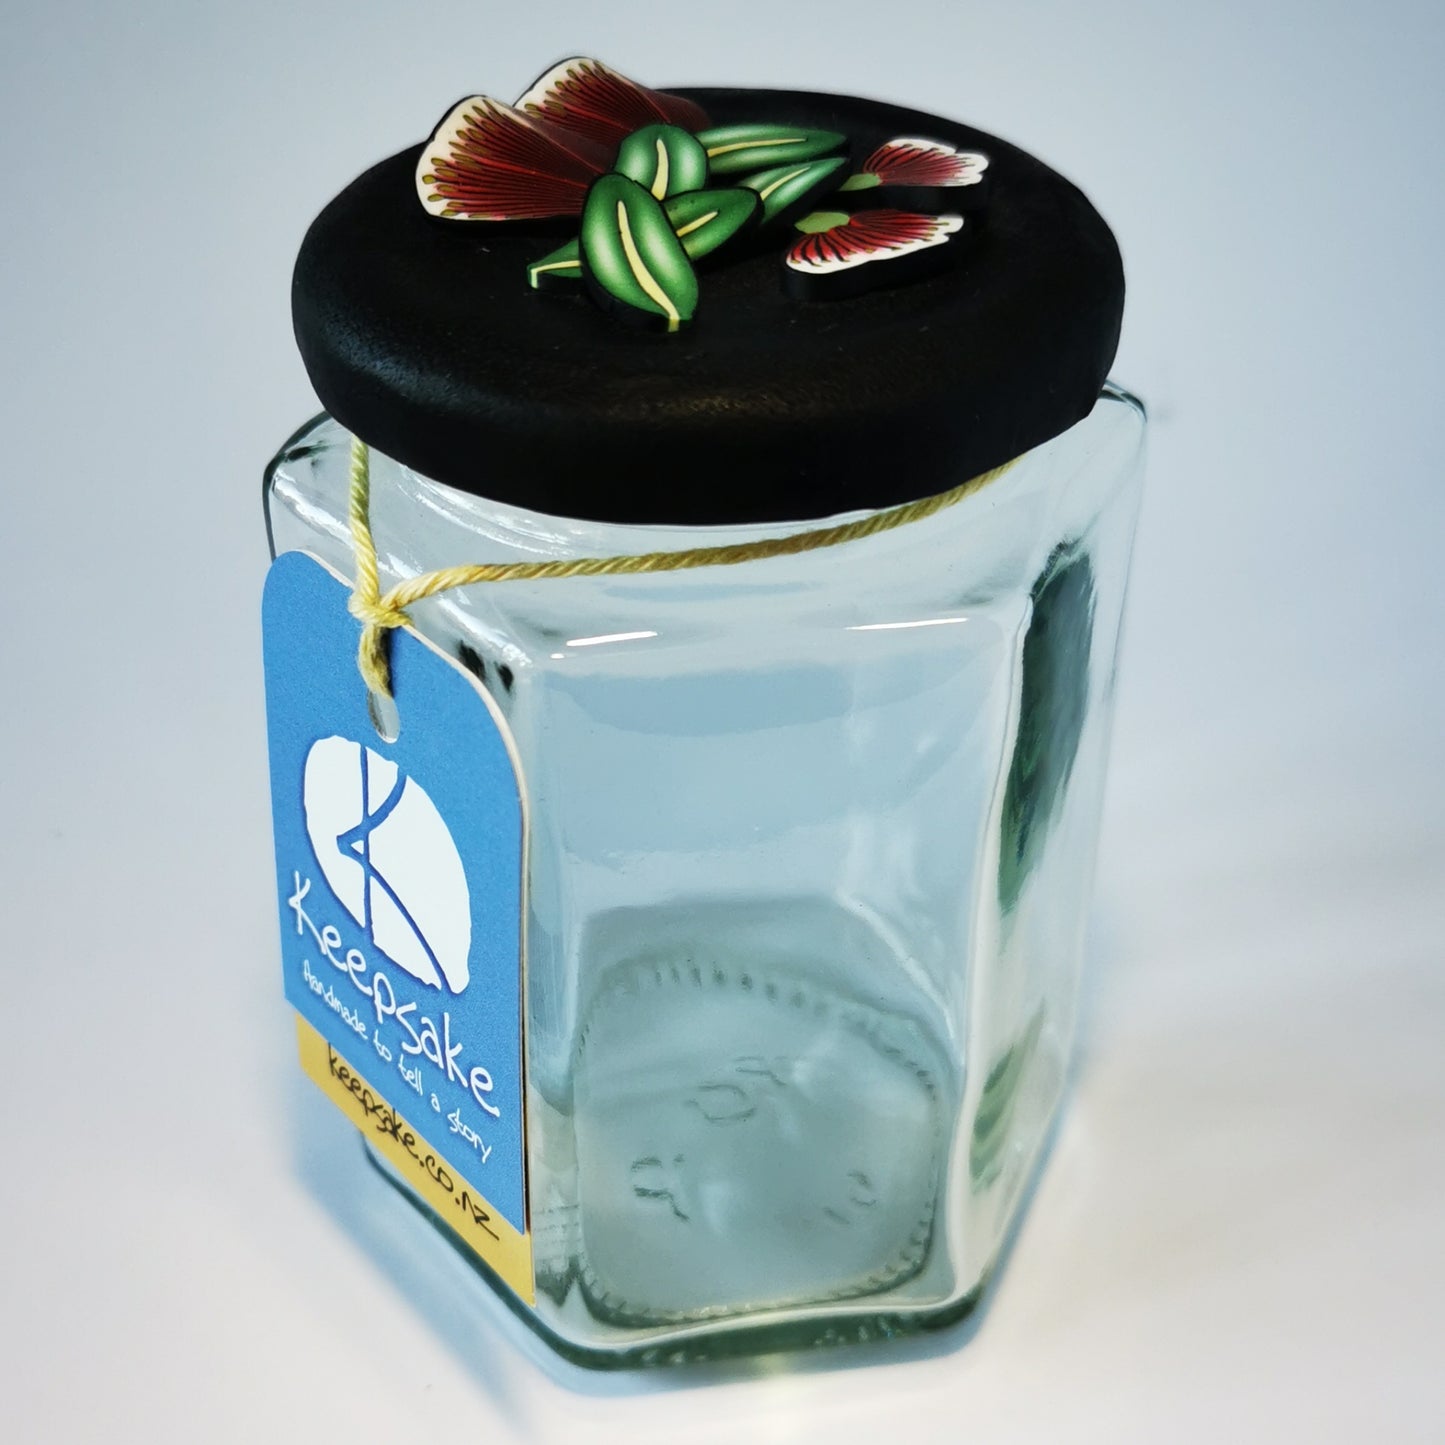 270ml glass hexagonal  jar and lid hand-decorated in New Zealand, with  an air-tight lid decorated with polymer clay pohutukawa flowers and leaves. Ready to be filled with fudge, sweets or other treasures.